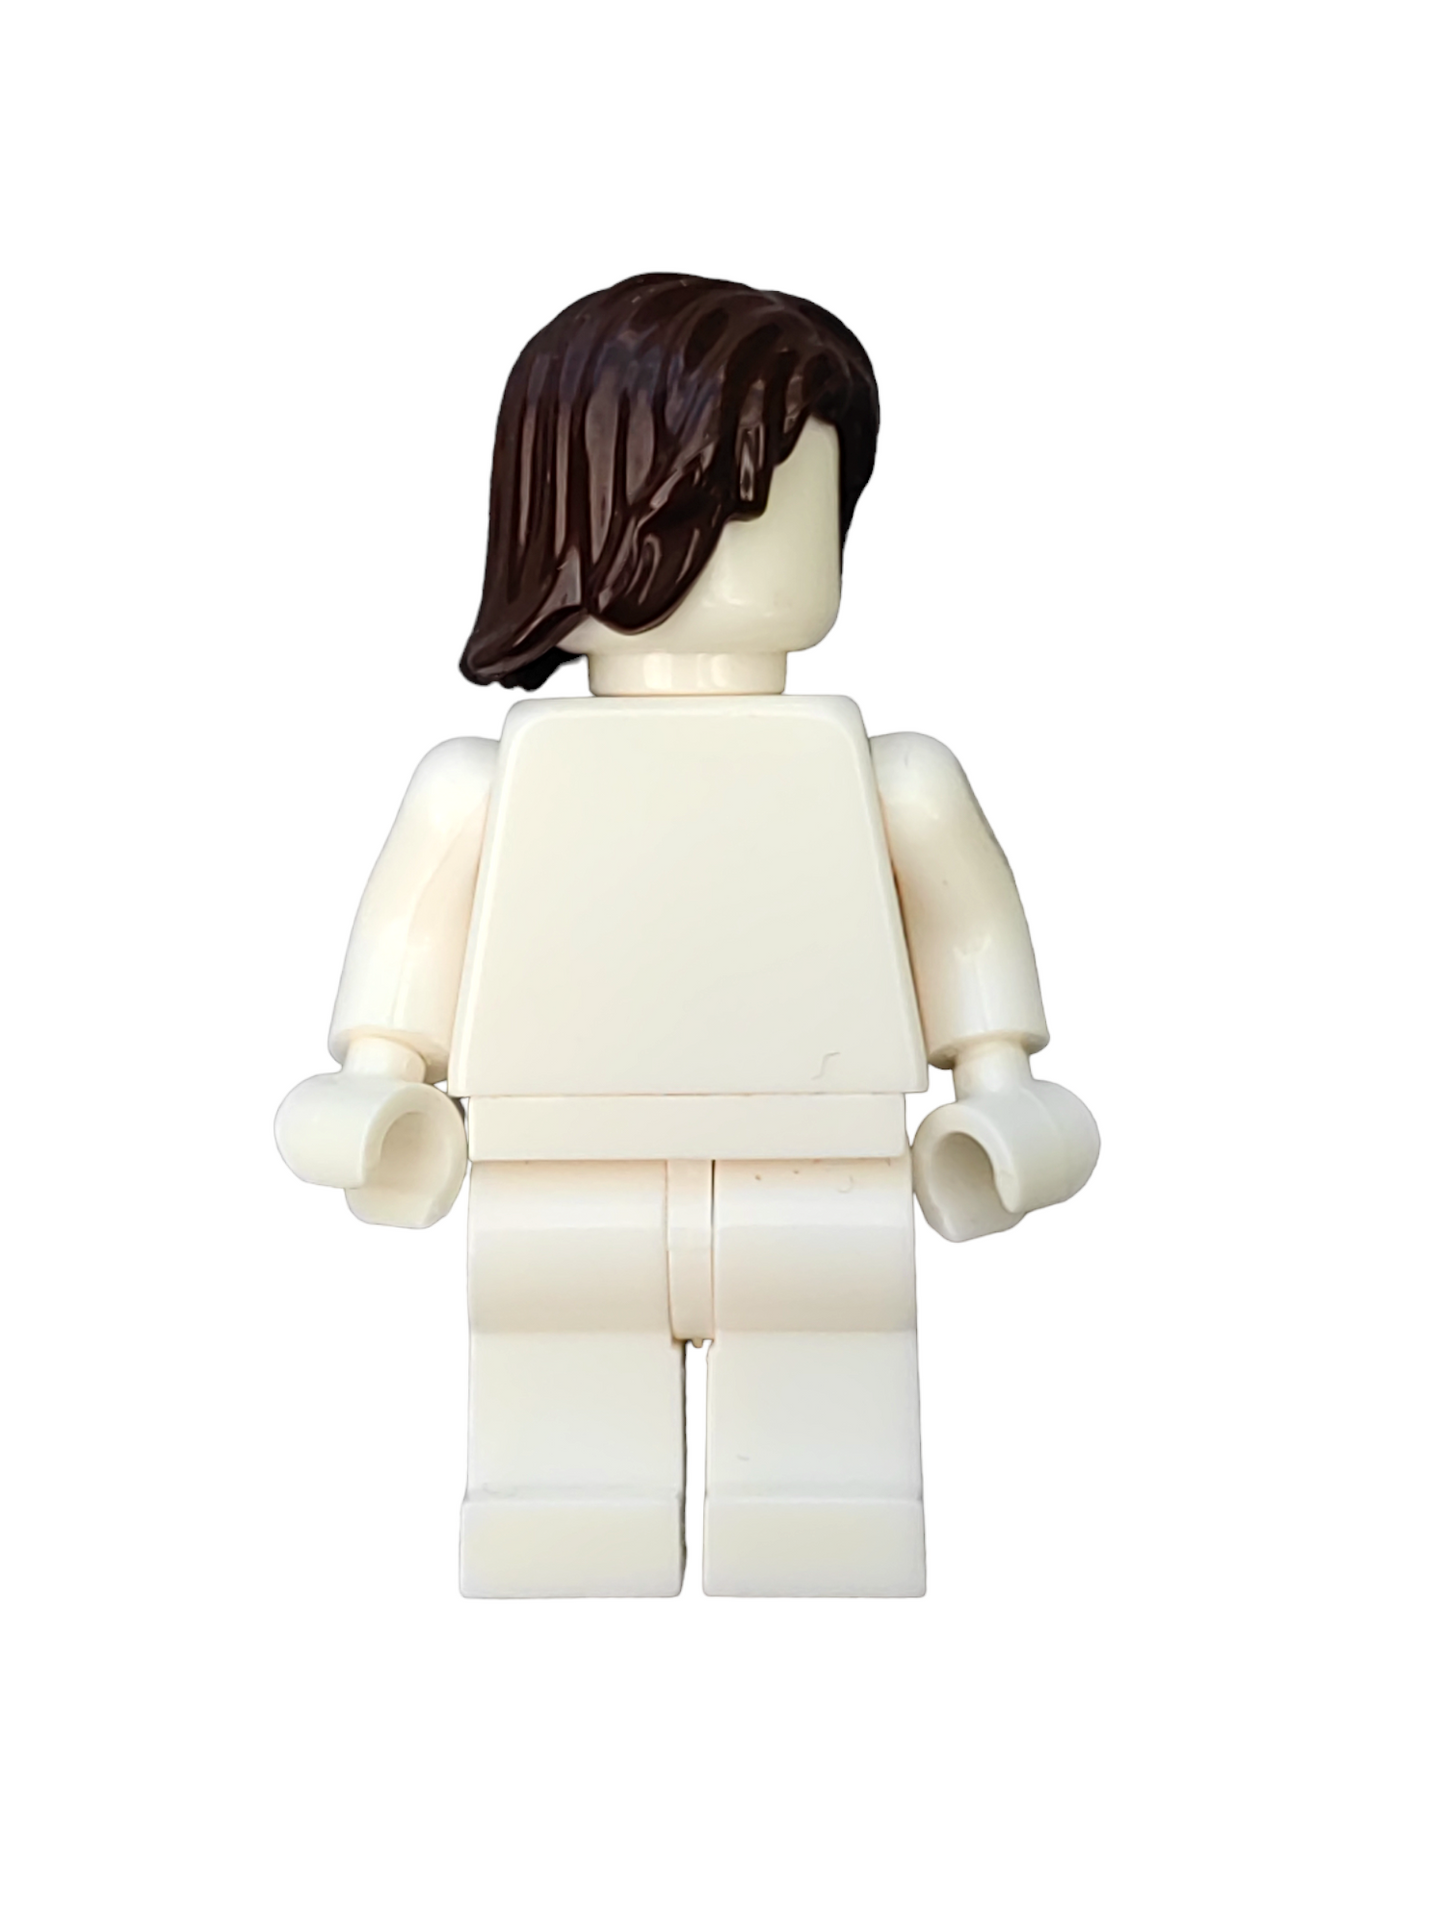 LEGO Wig, Dark Brown Hair Medium Length with Middle Parting - UB1311